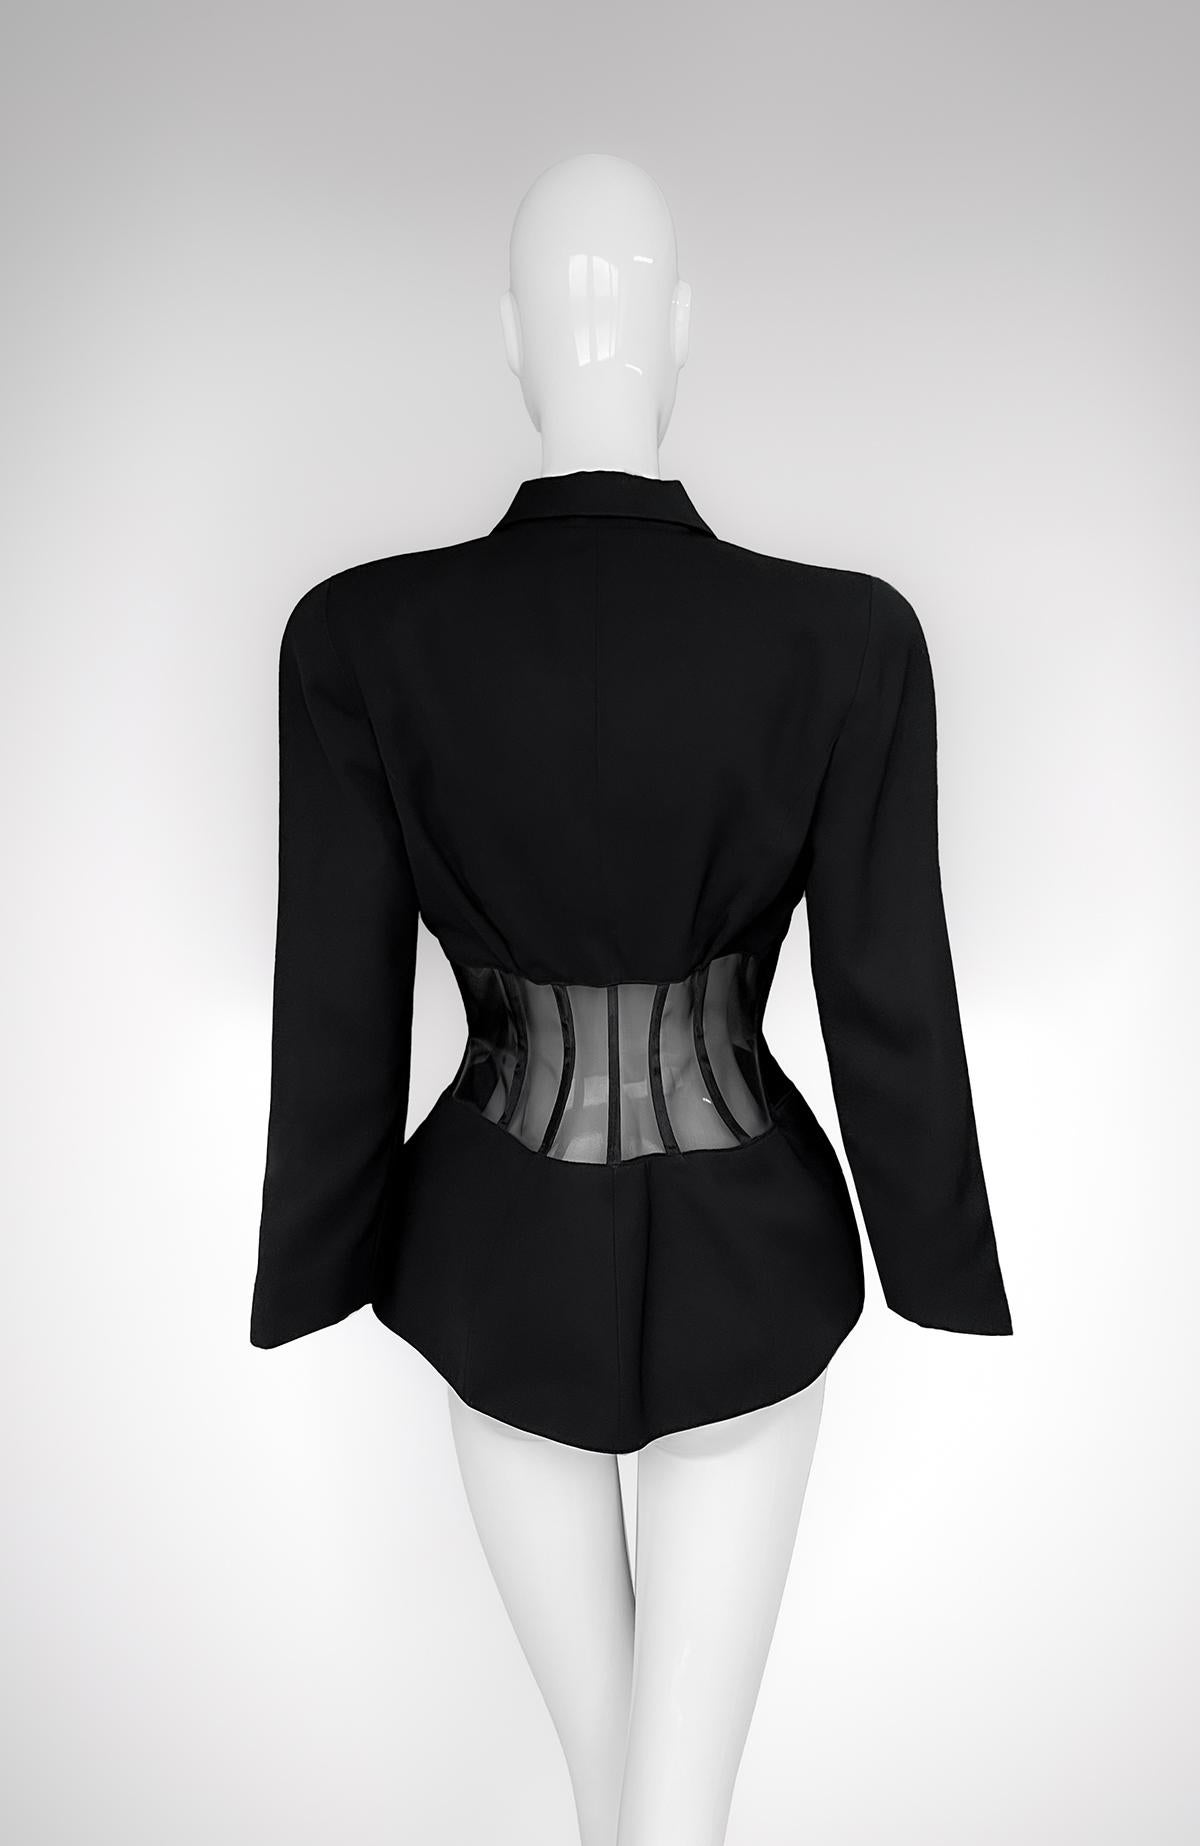 Iconic Thierry Mugler 1995 Sculptural Jacket with Sheer Boned Corset Waist For Sale 3